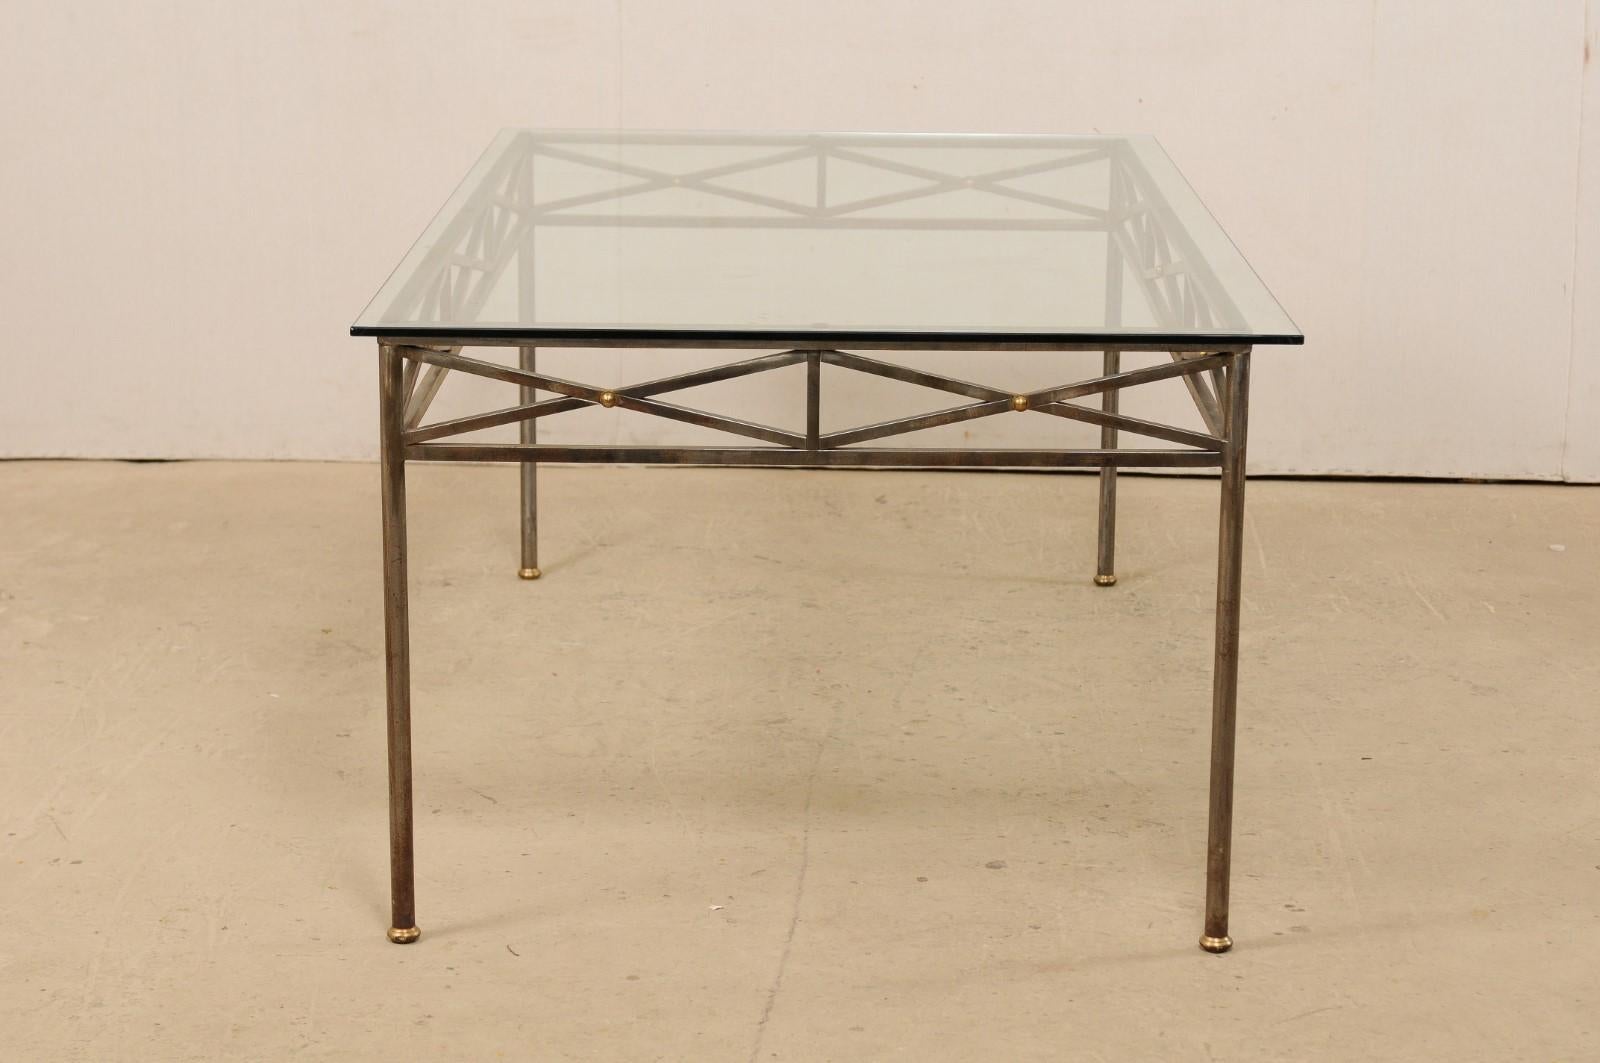 20th Century Neoclassical Inspired Metal Dining Table with Brass Accents and Glass Top For Sale